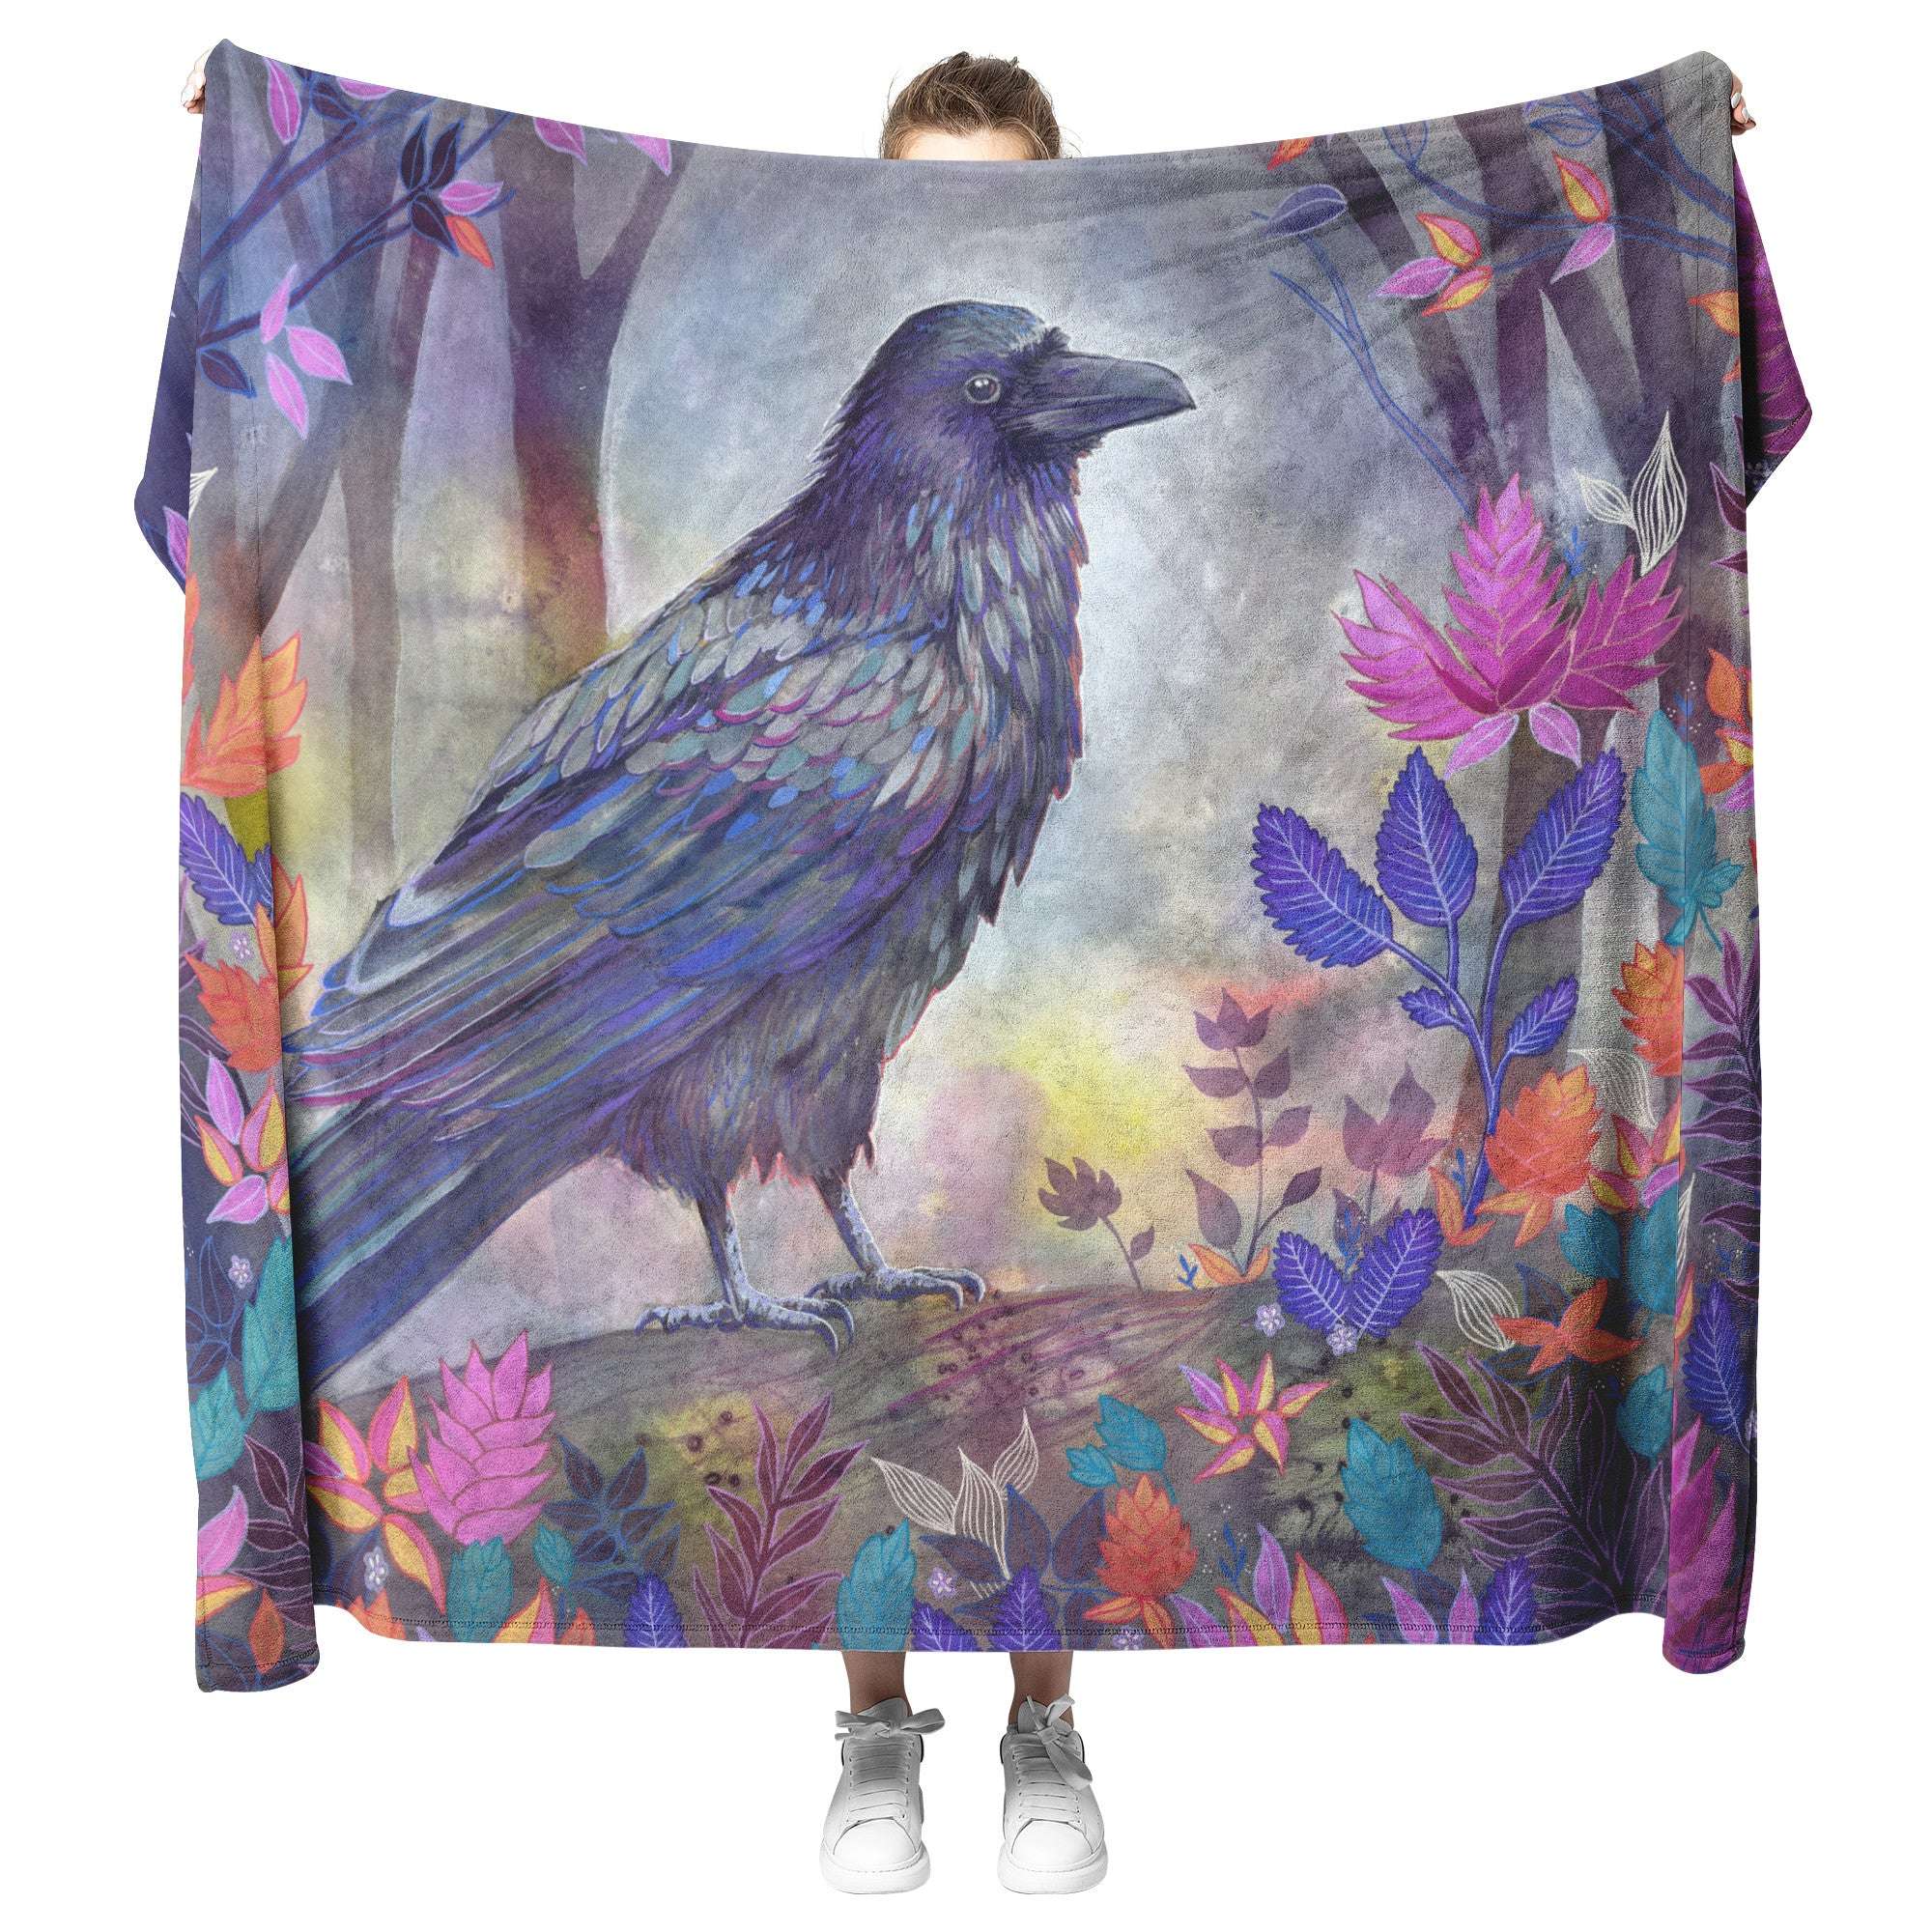 A person holding a Raven Blanket featuring a vivid illustration of a raven in a forest surrounded by colorful leaves and flowers.